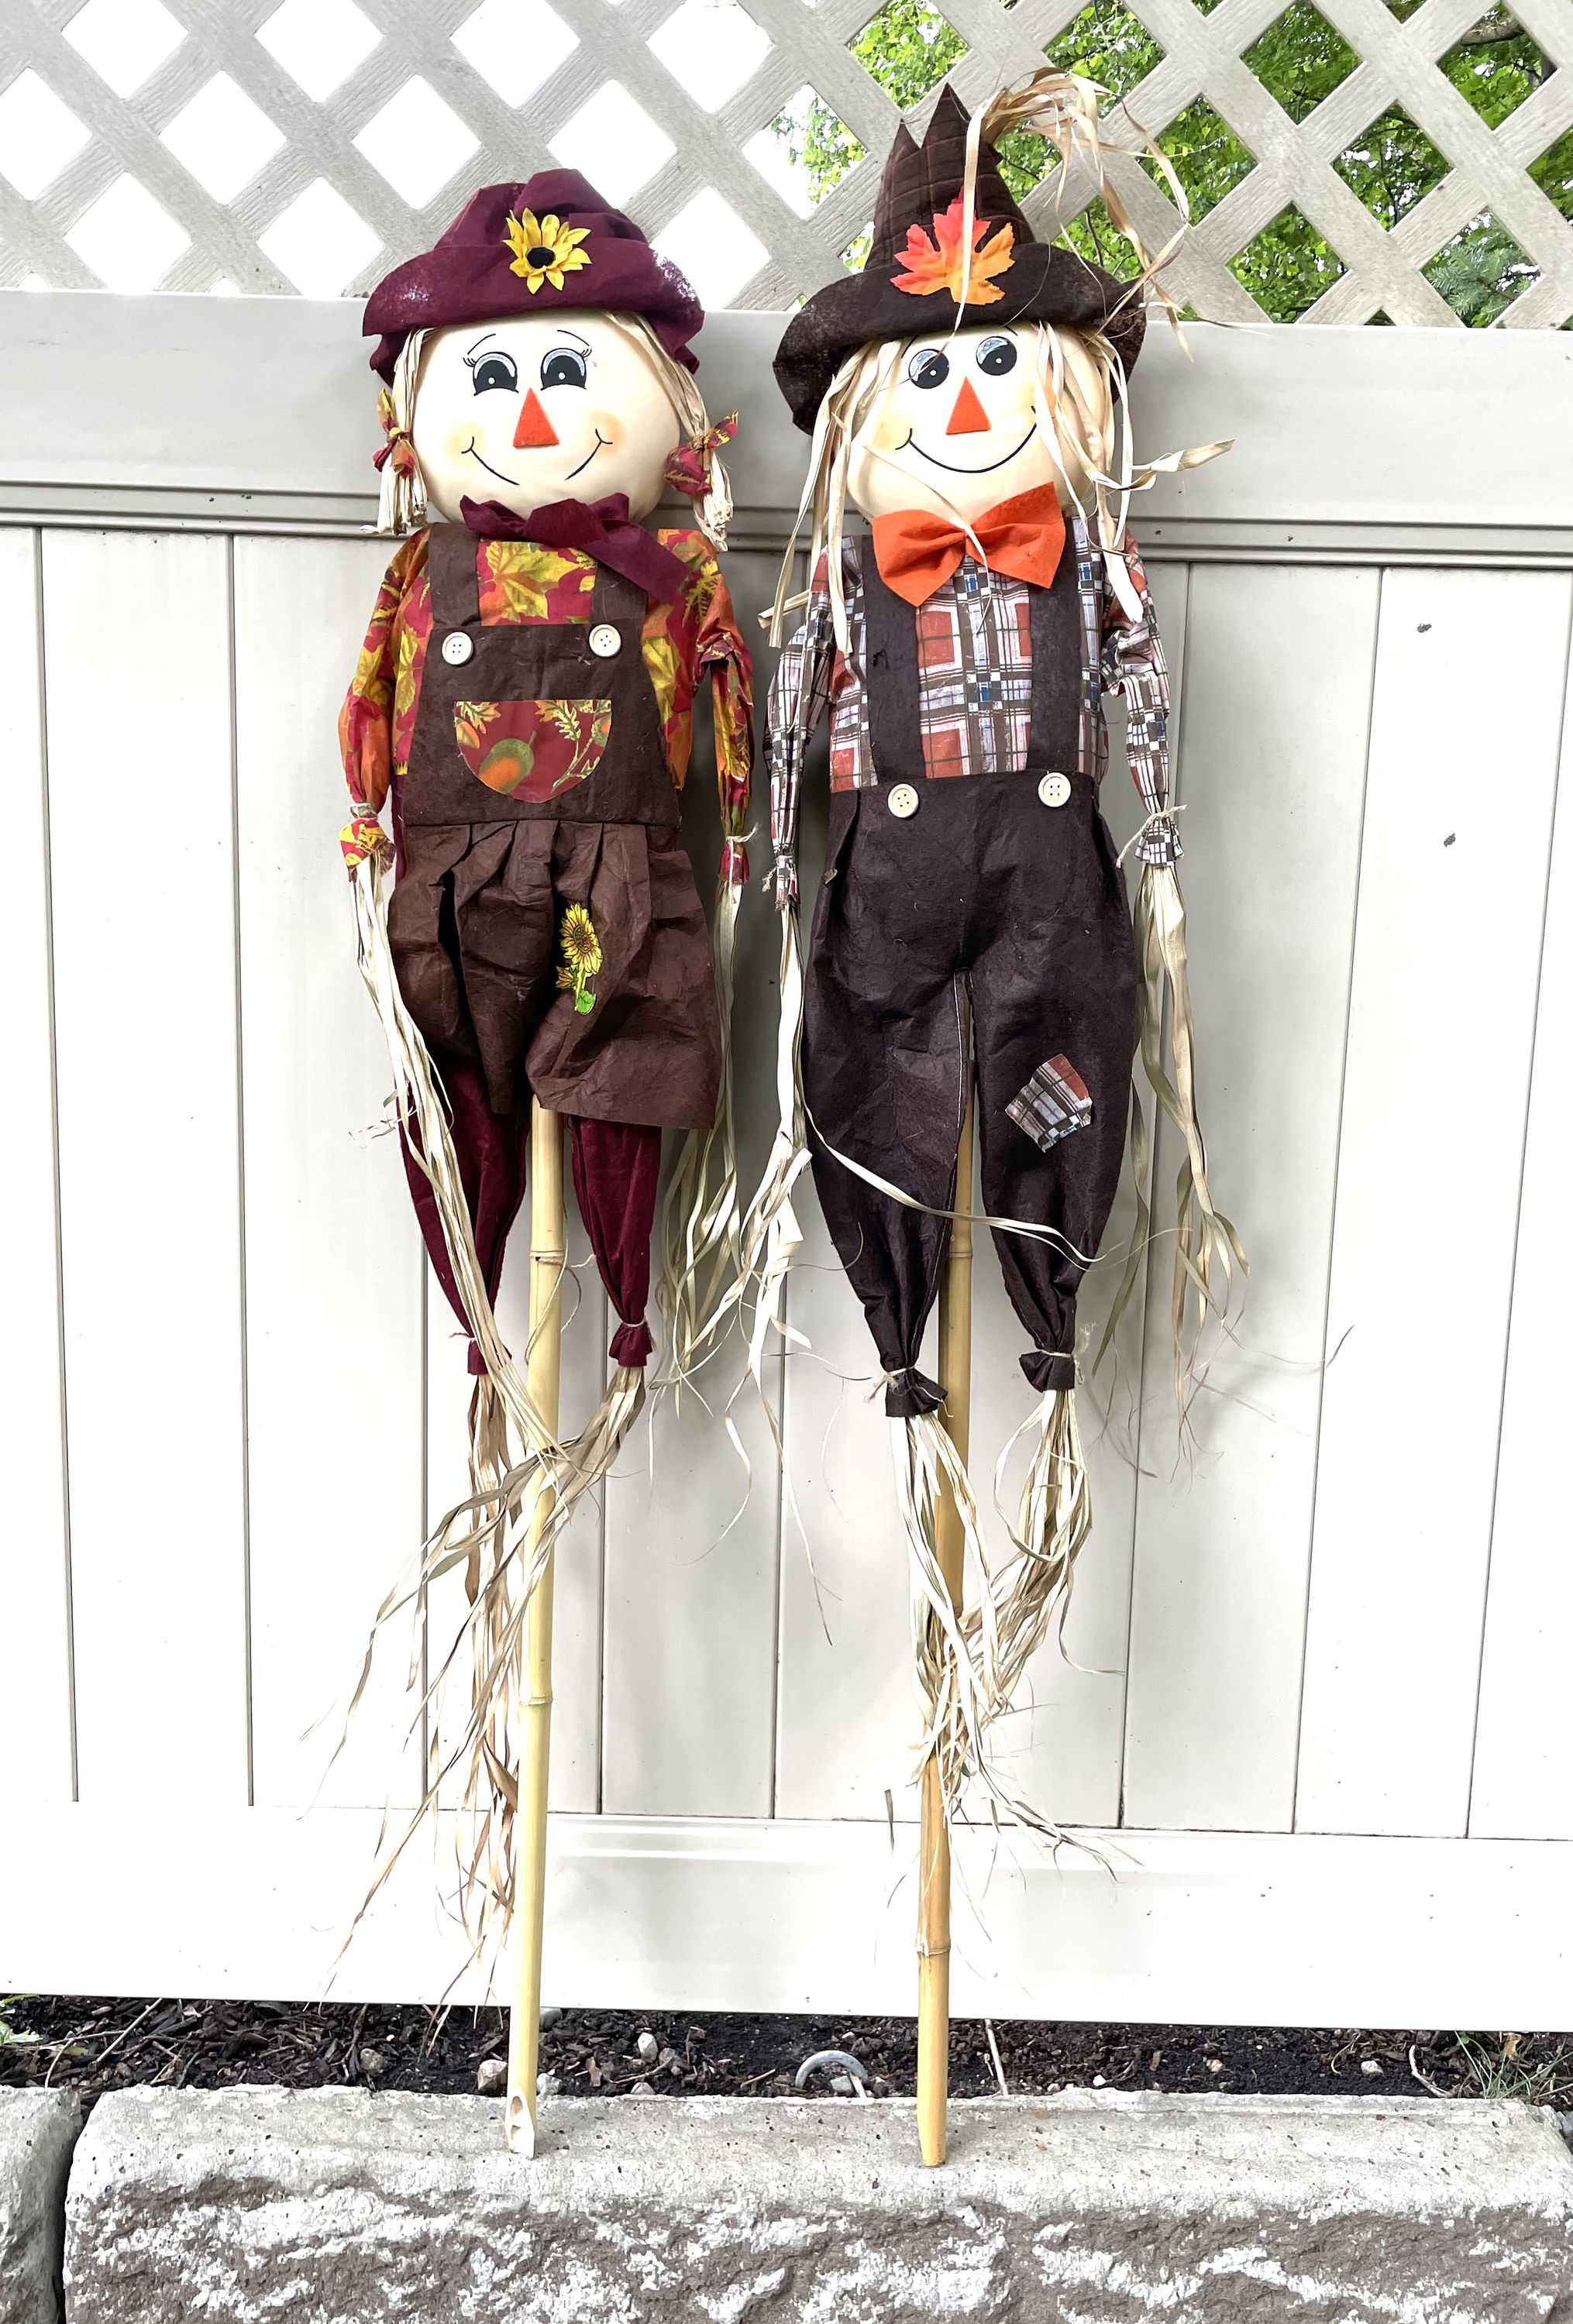 Worth Imports 5-ft Happy Harvest Yard Decoration Scarecrow (2-Pack